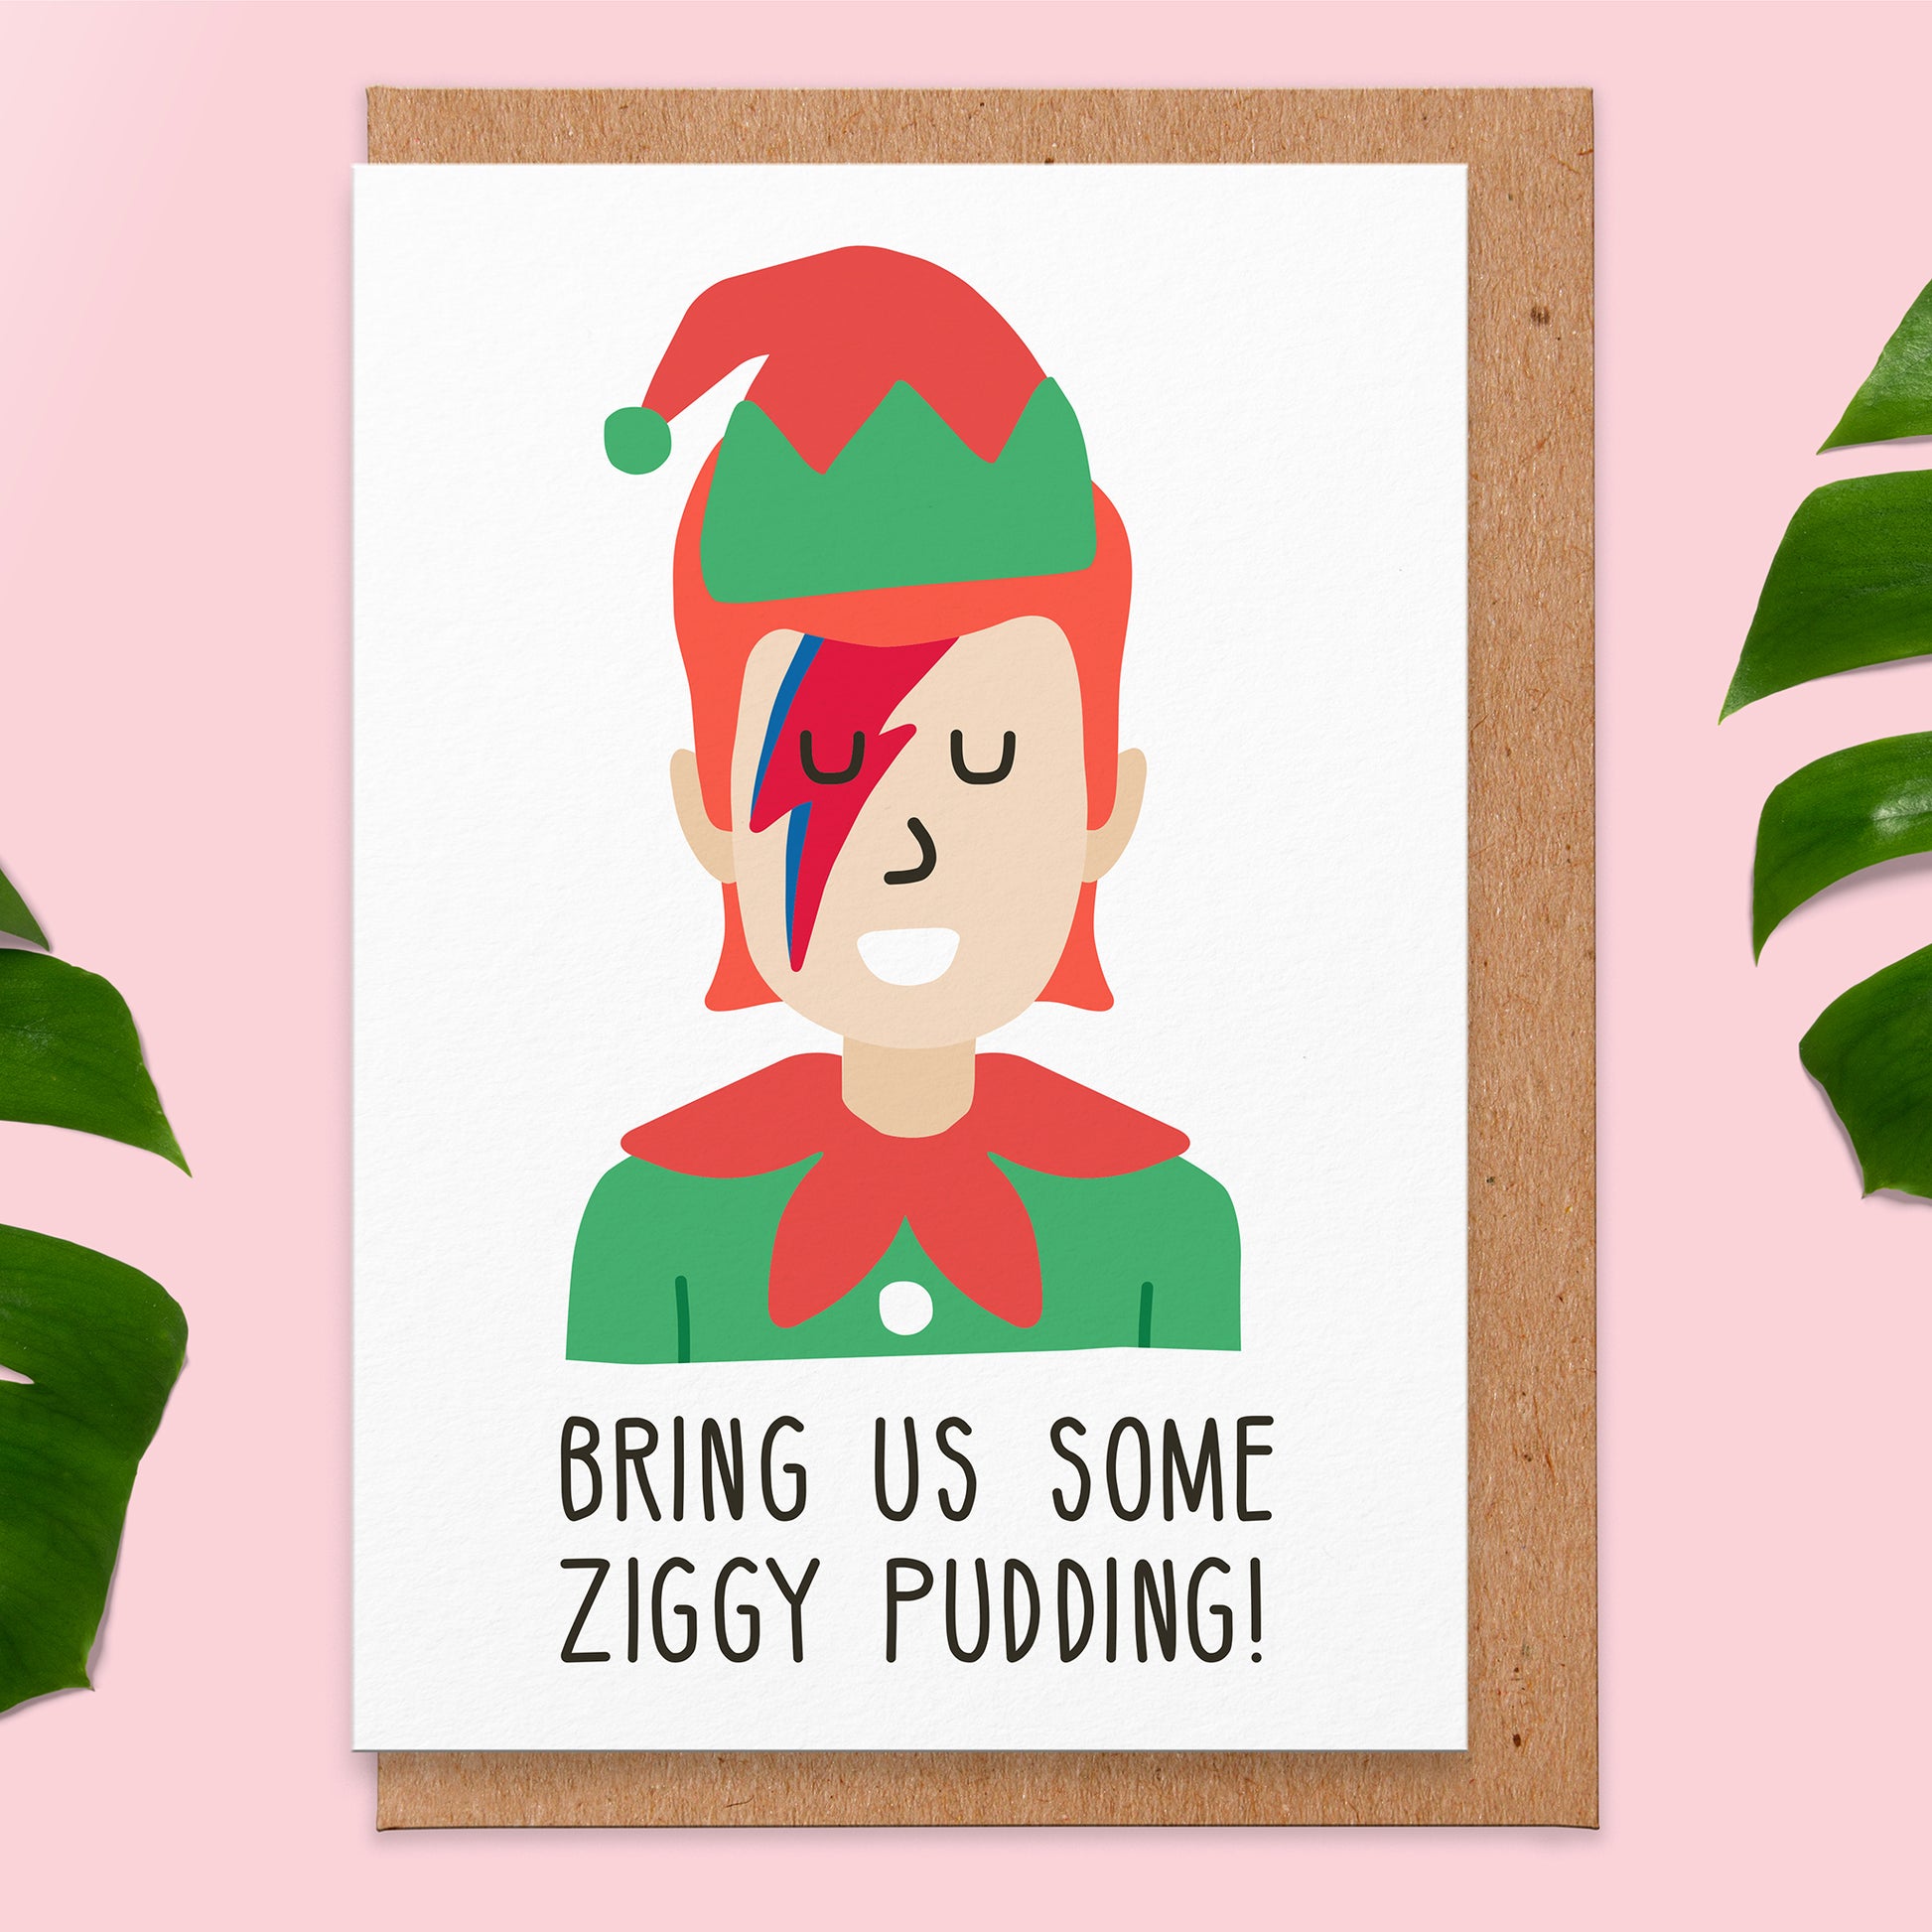 Christmas card with an illustration of the starman singer dressed up as an elf and the text reads bring us some ziggy pudding!